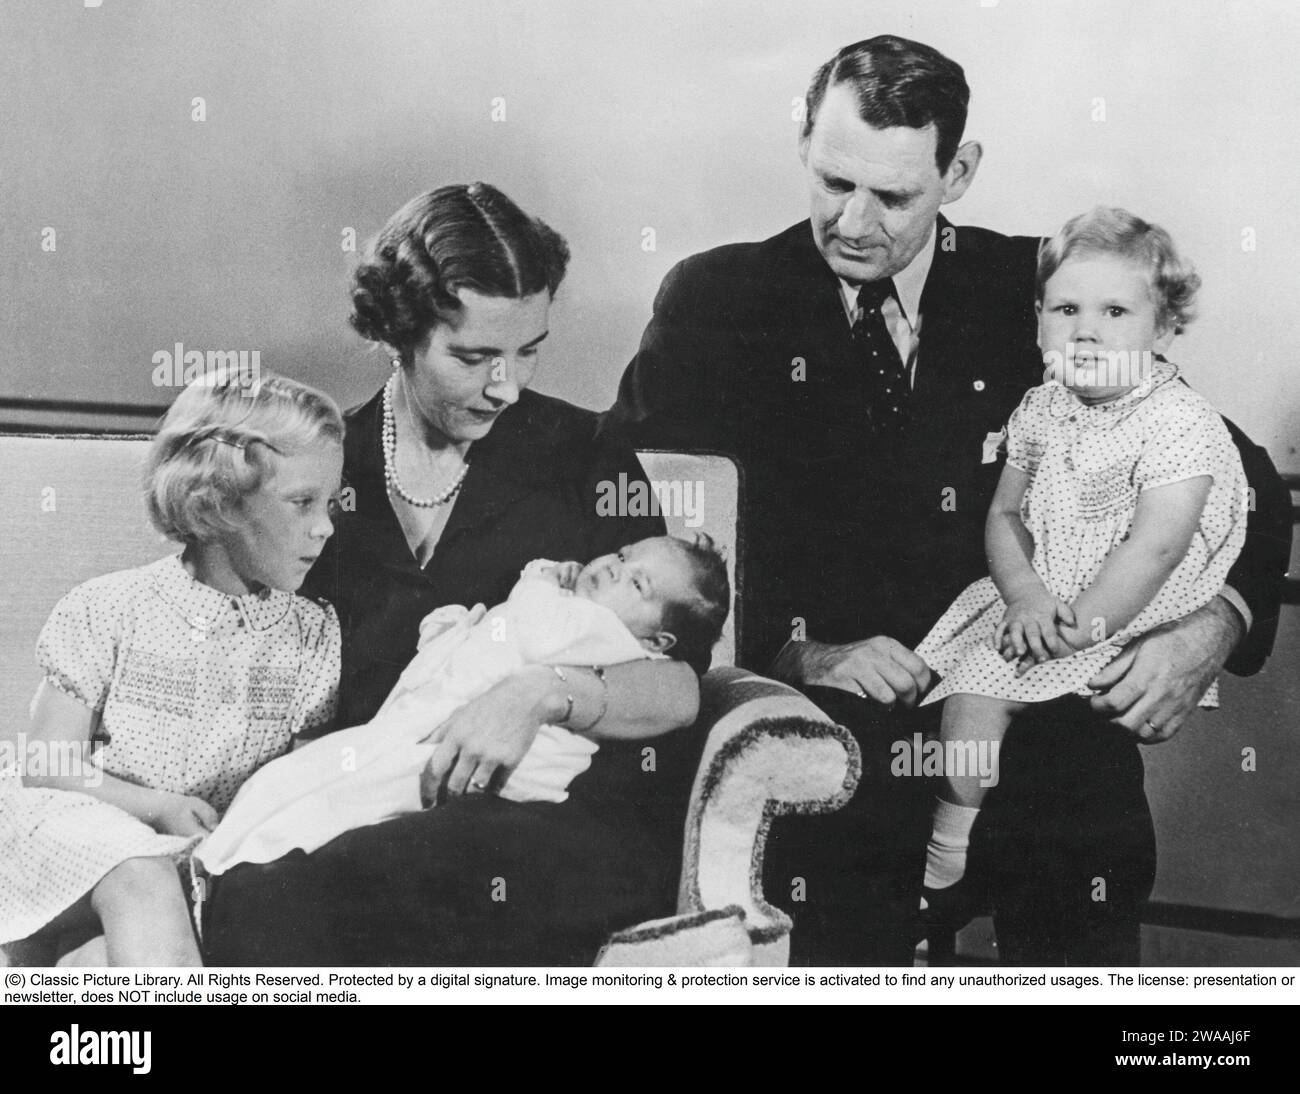 Queen Margrethe II of Denmark.  Pictured with her mother and father, Ingrid of Sweden and king Frederick IX of Denmark. Princess Benedikte in her fathers knee. Princess Anne-Marie in Ingrids arms.  1946 Stock Photo